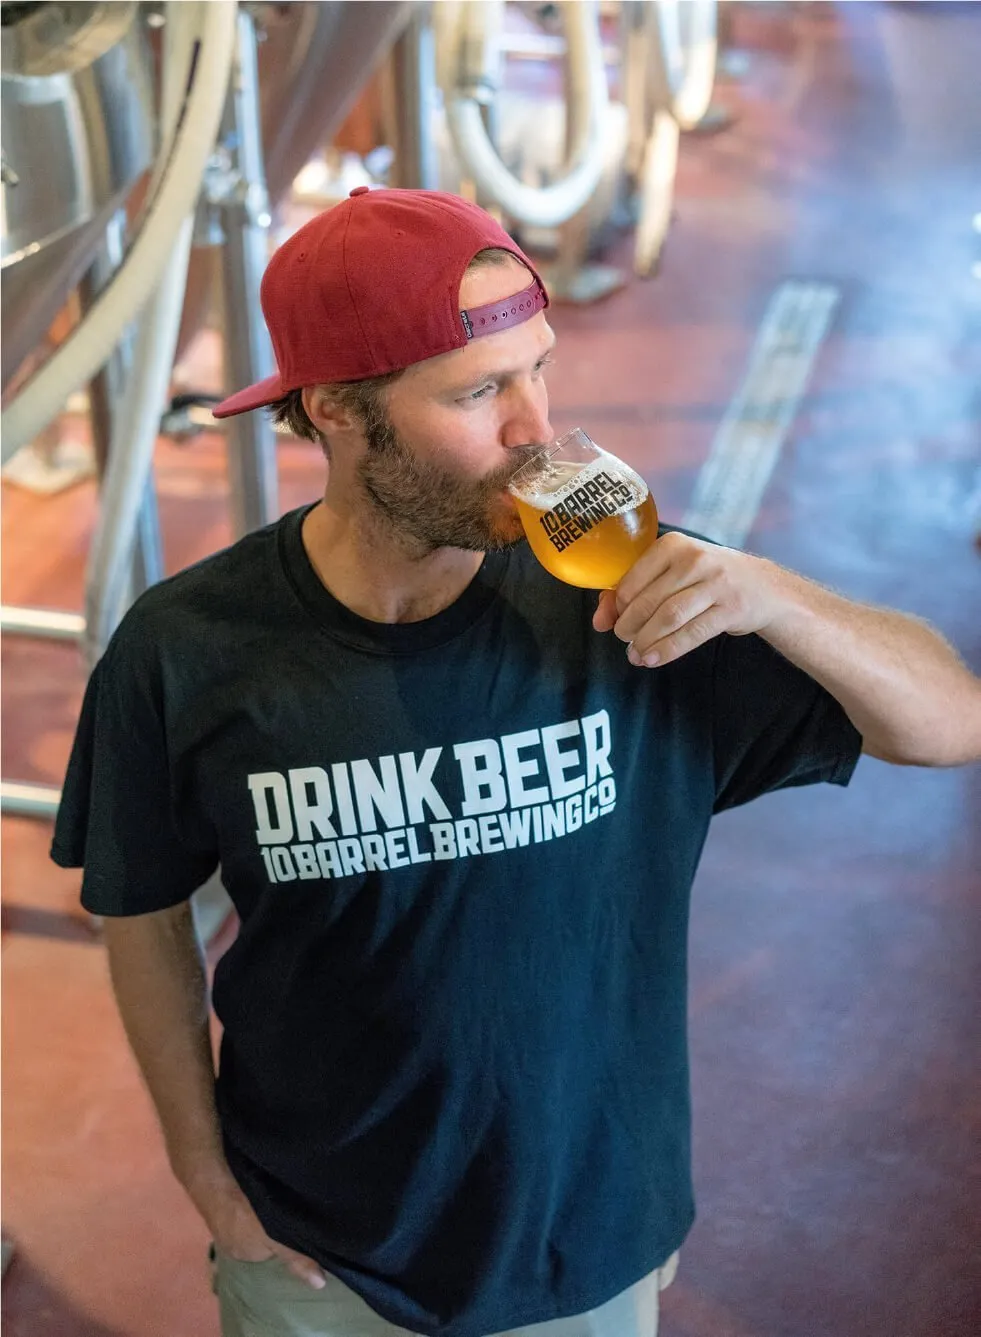 A man wearing a "drink beer 10 barrel brewing" t-shirt is tasting beer in a brewery.